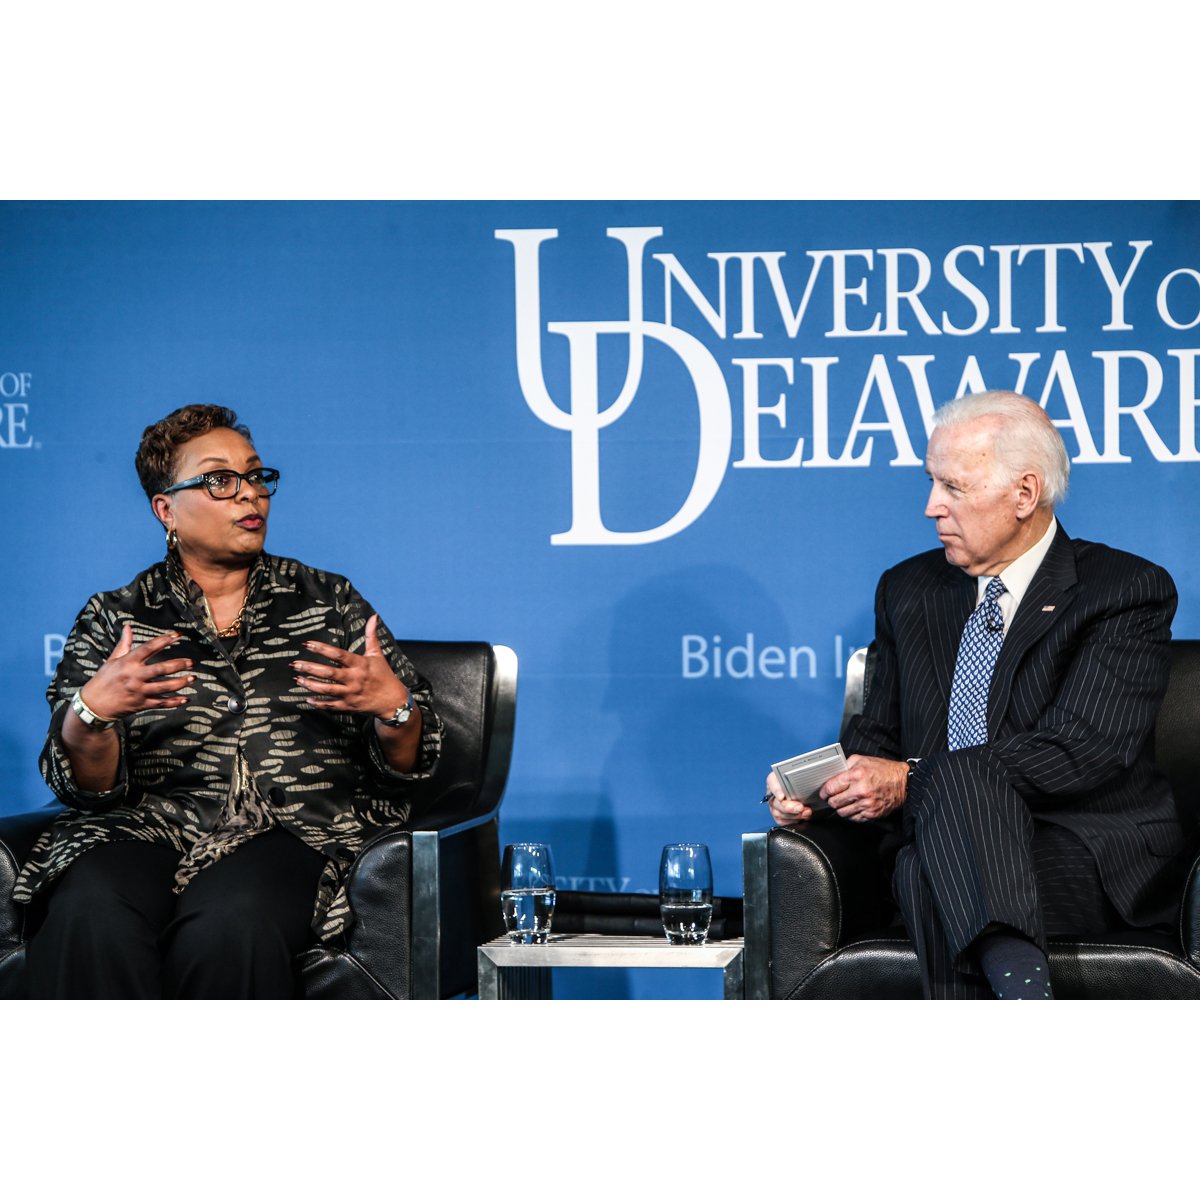 “Giving students the opportunity to pursue early education has changed the trajectory of their lives.” @pgccpres Dr. Charlene Dukes discussed #Comm_College's role regarding #QualityJobs on a panel hosted by @JoeBiden and the @UDBidenInst yesterday.